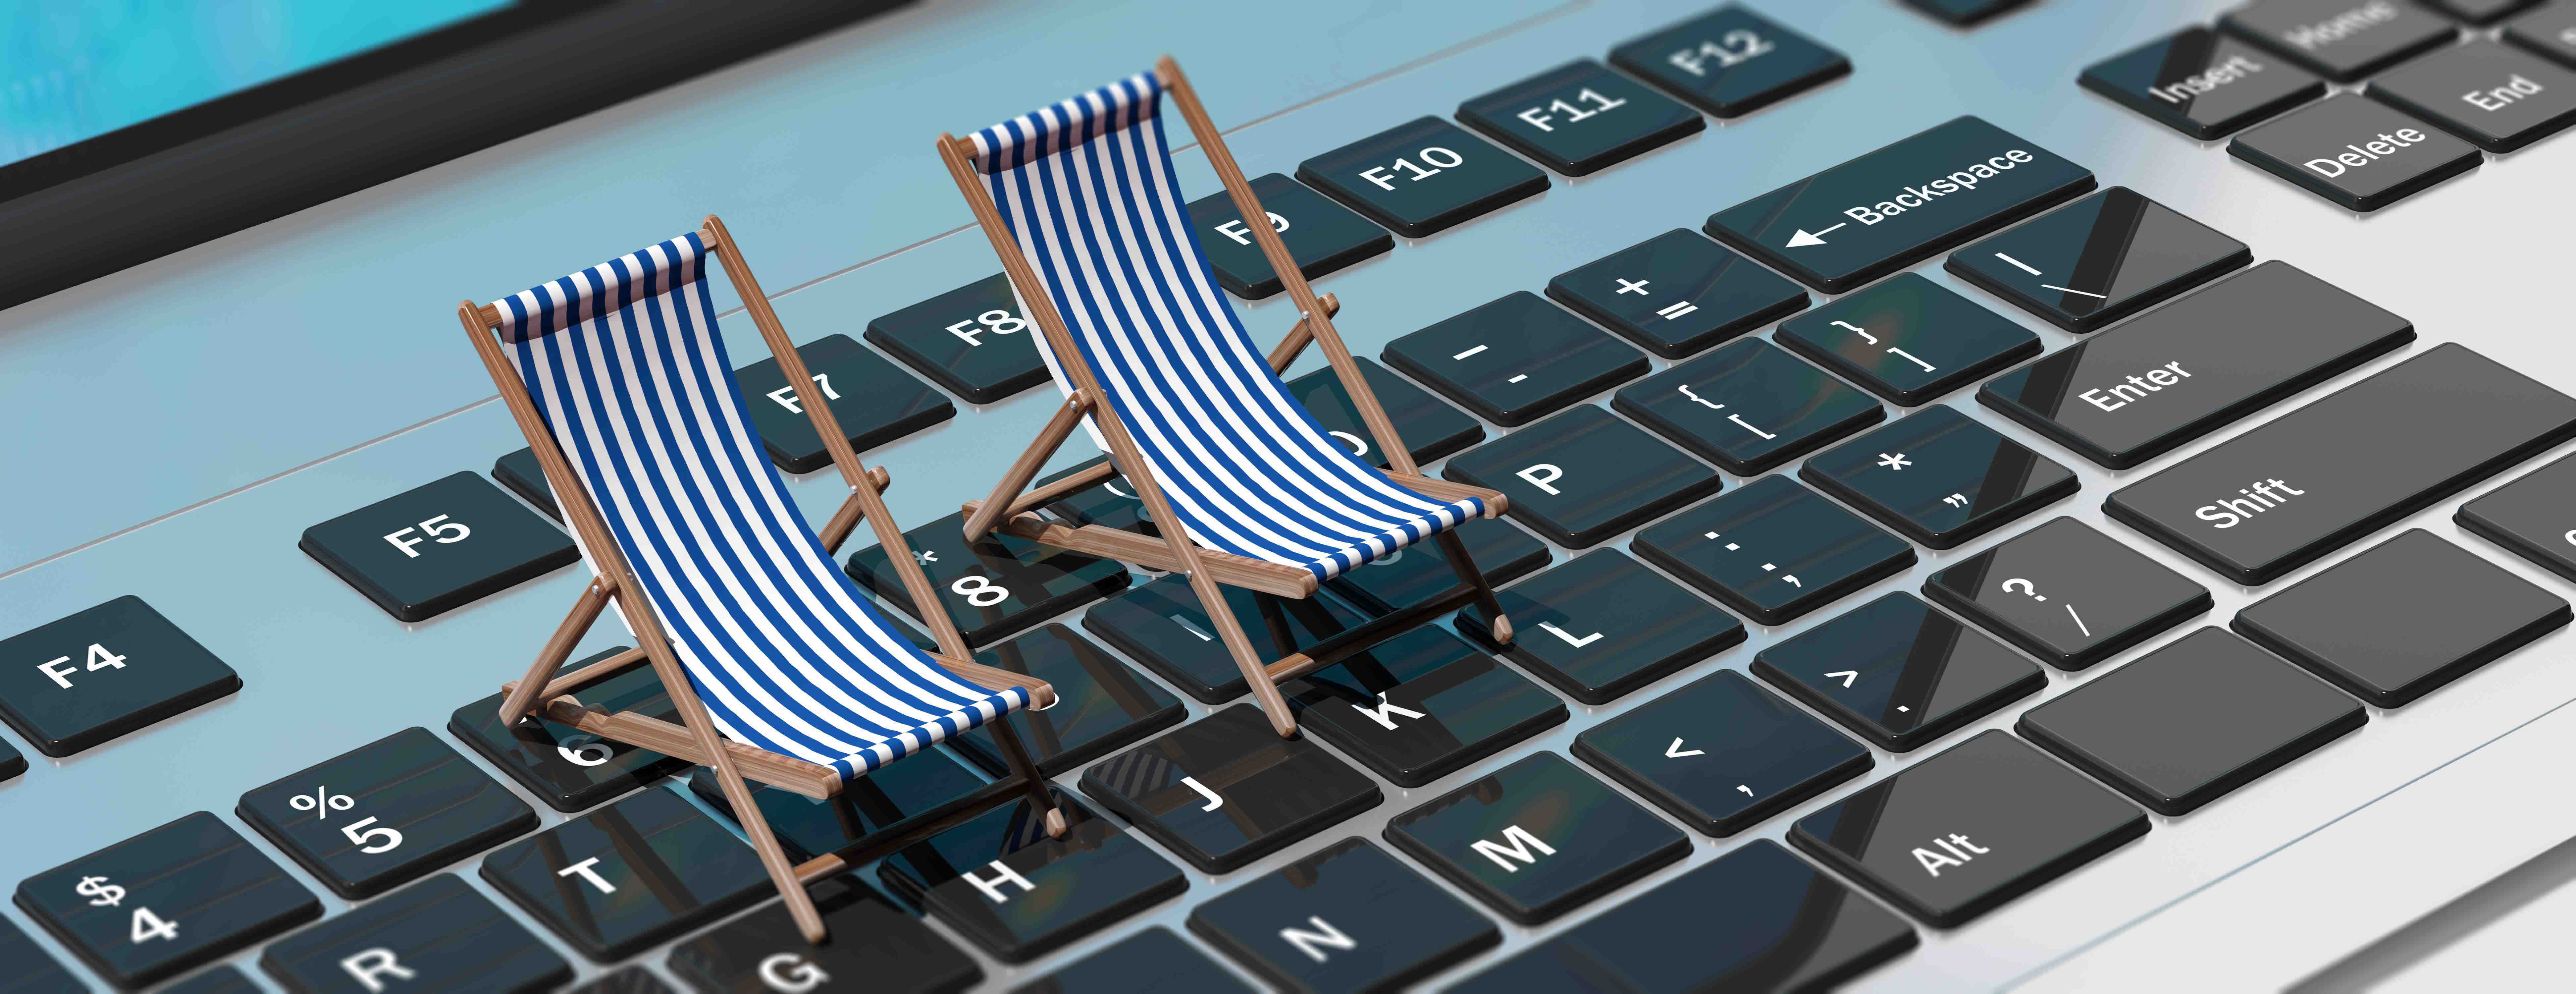 Stylized image of two striped beach chairs on top of a giant laptop keyboard